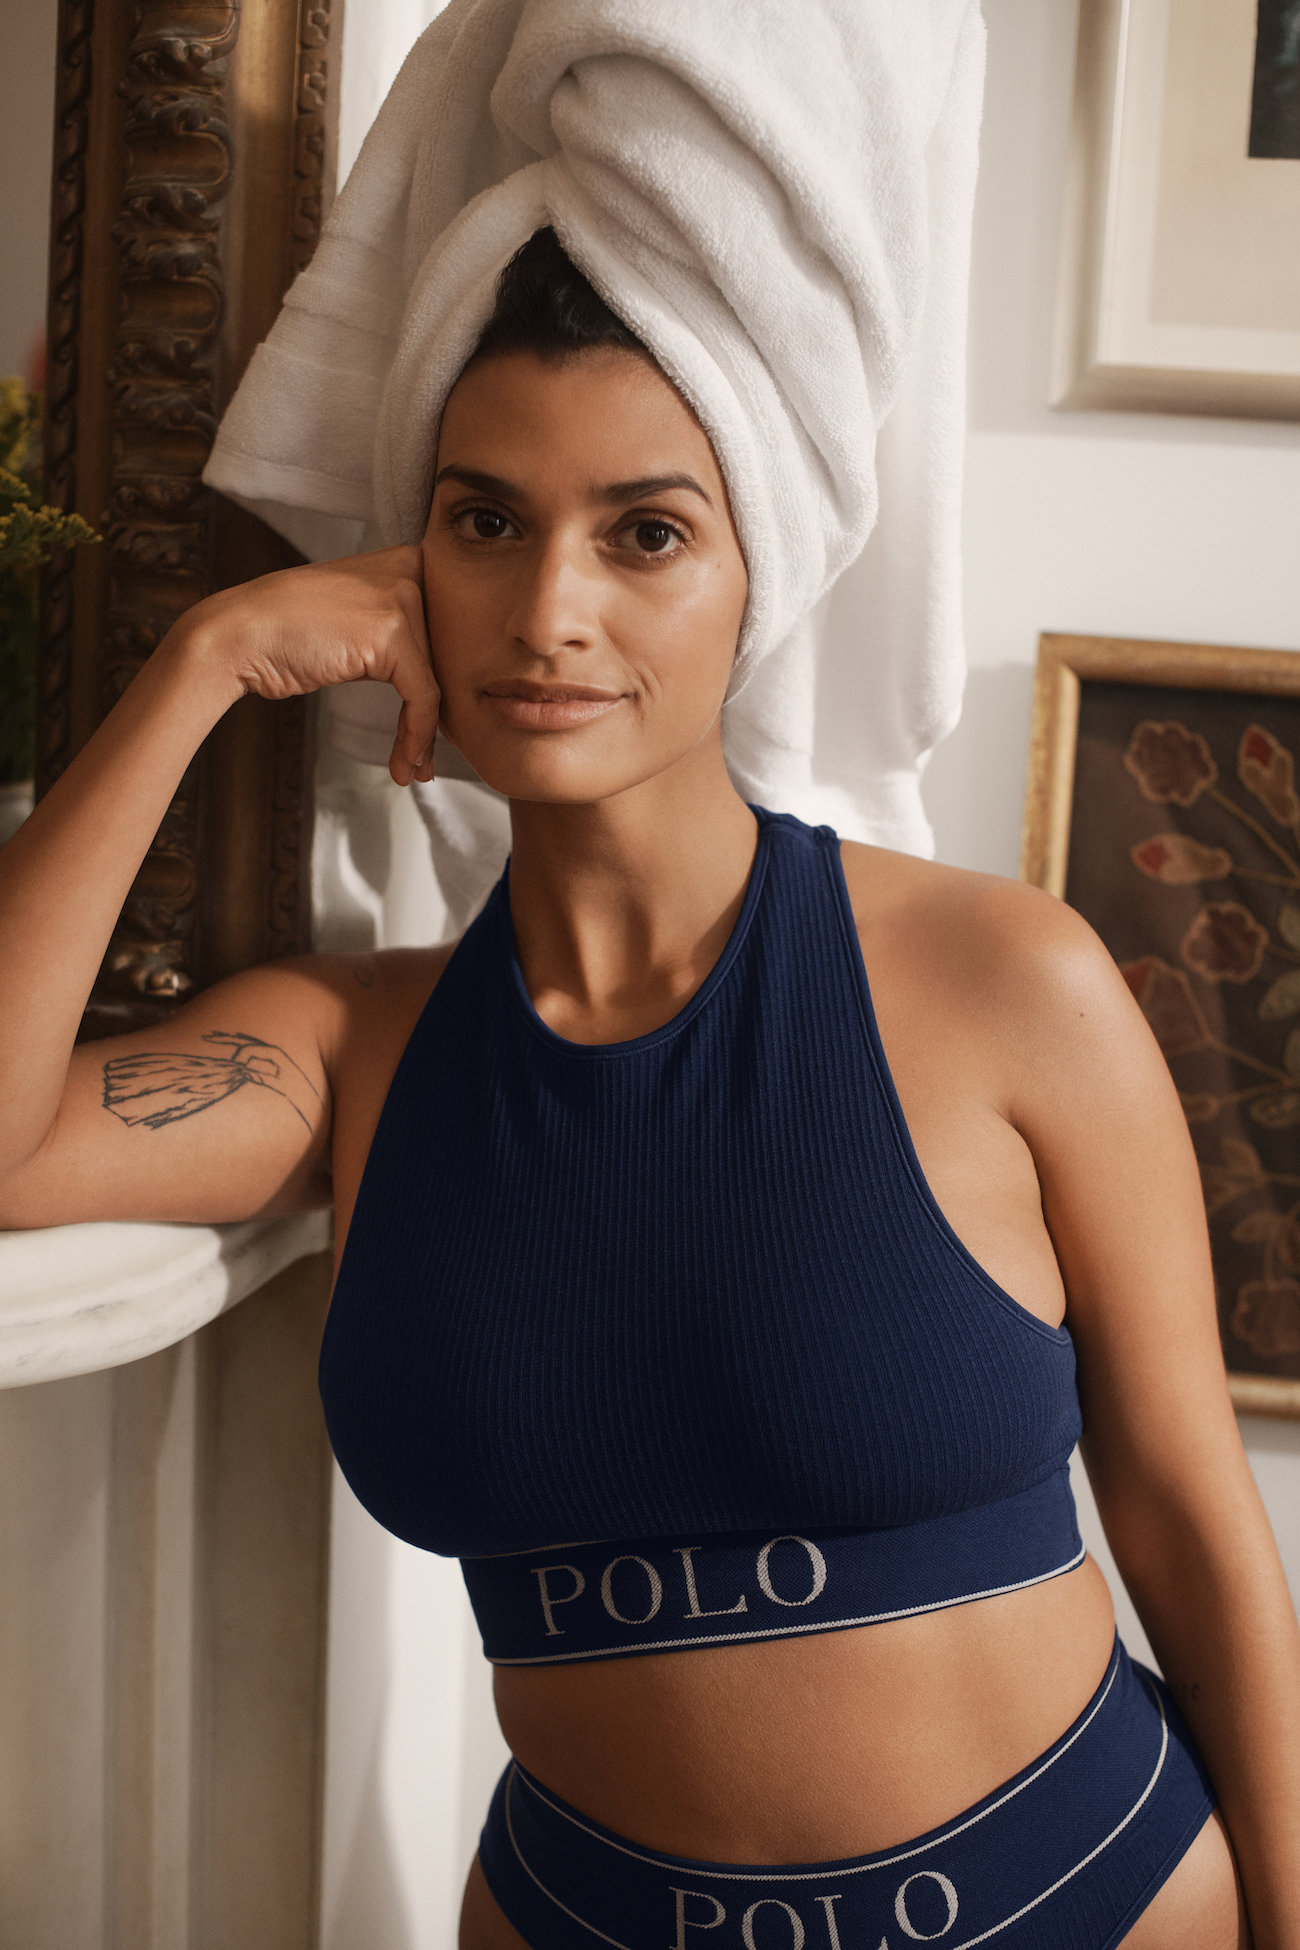 What's Underneath Matters Most: Polo Ralph Lauren Launches Women's